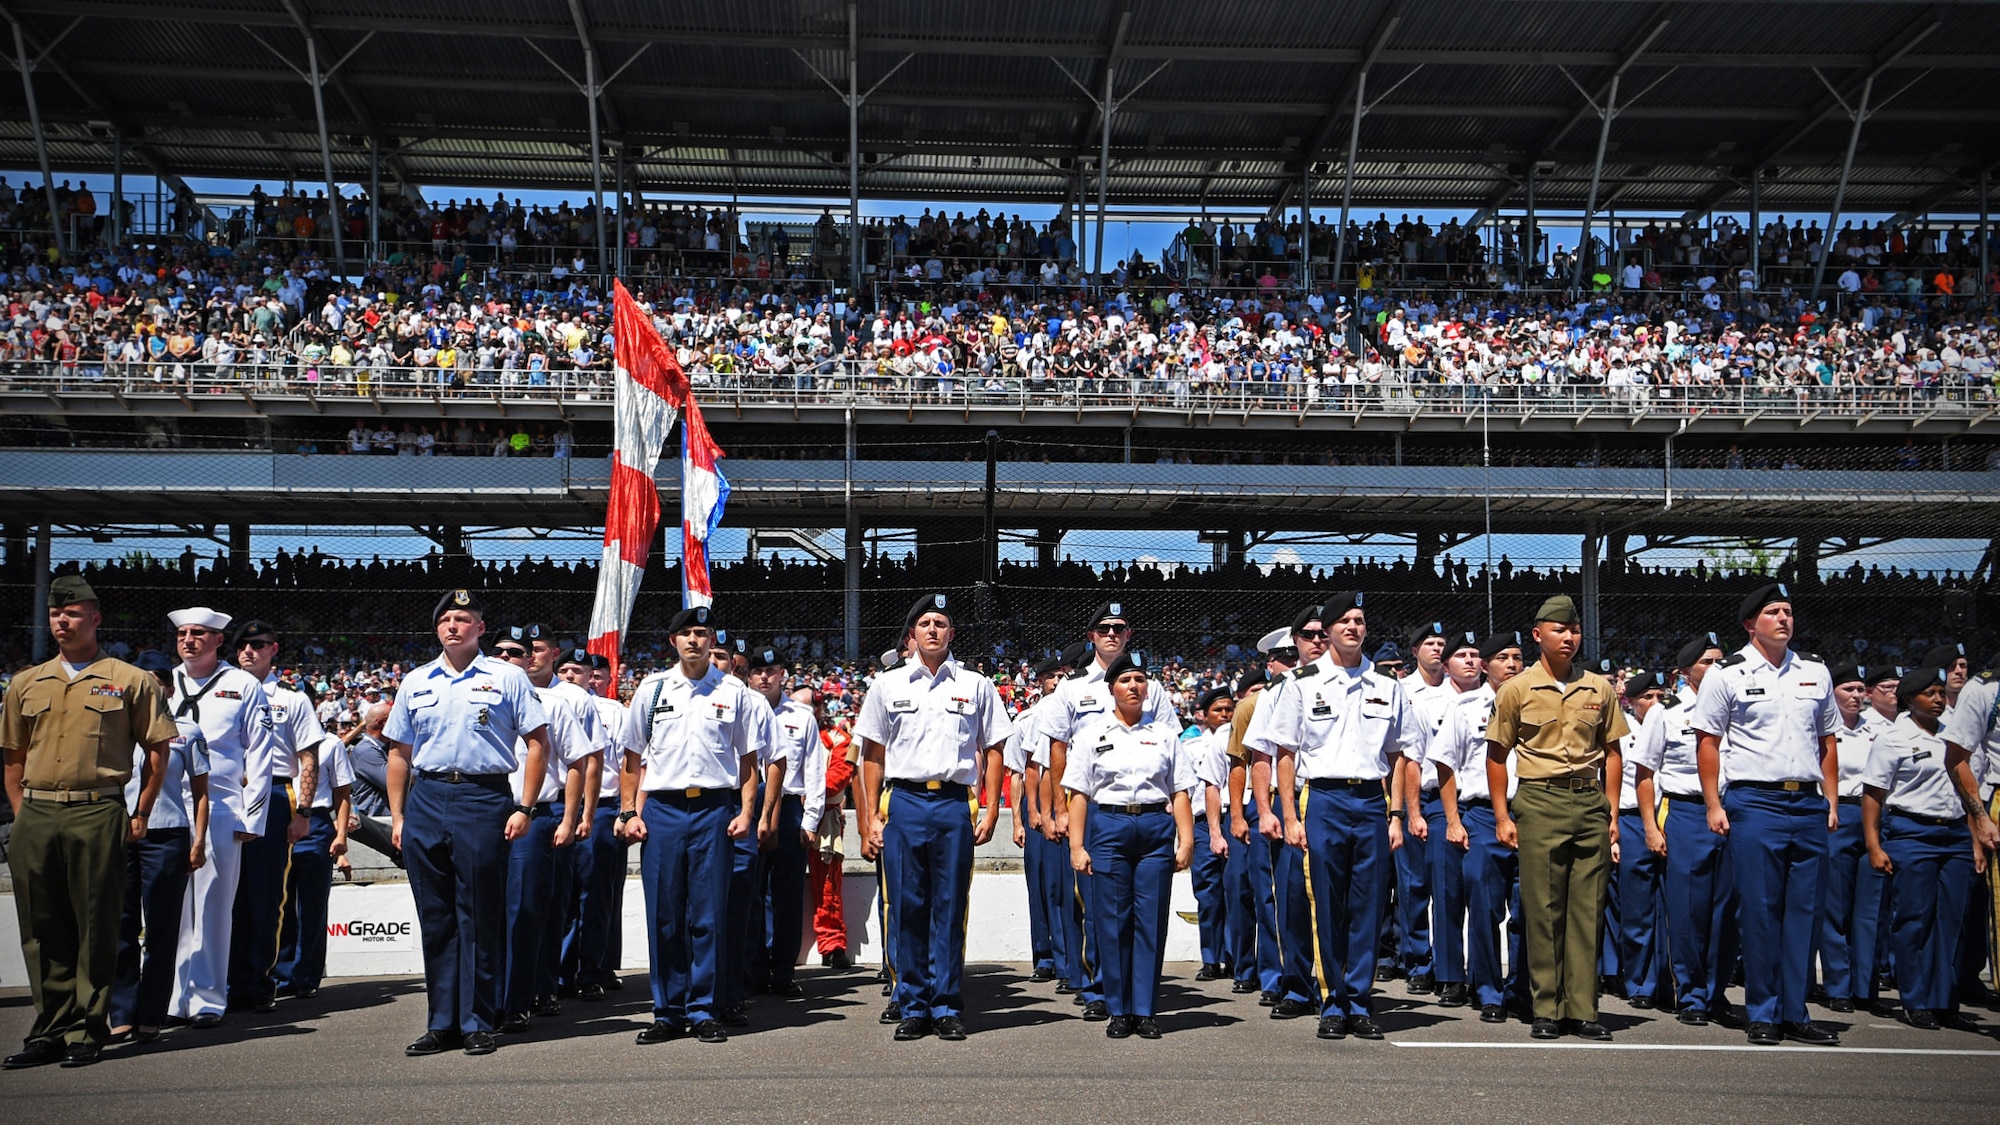 Grissom Airmen march in 102nd Indy 500